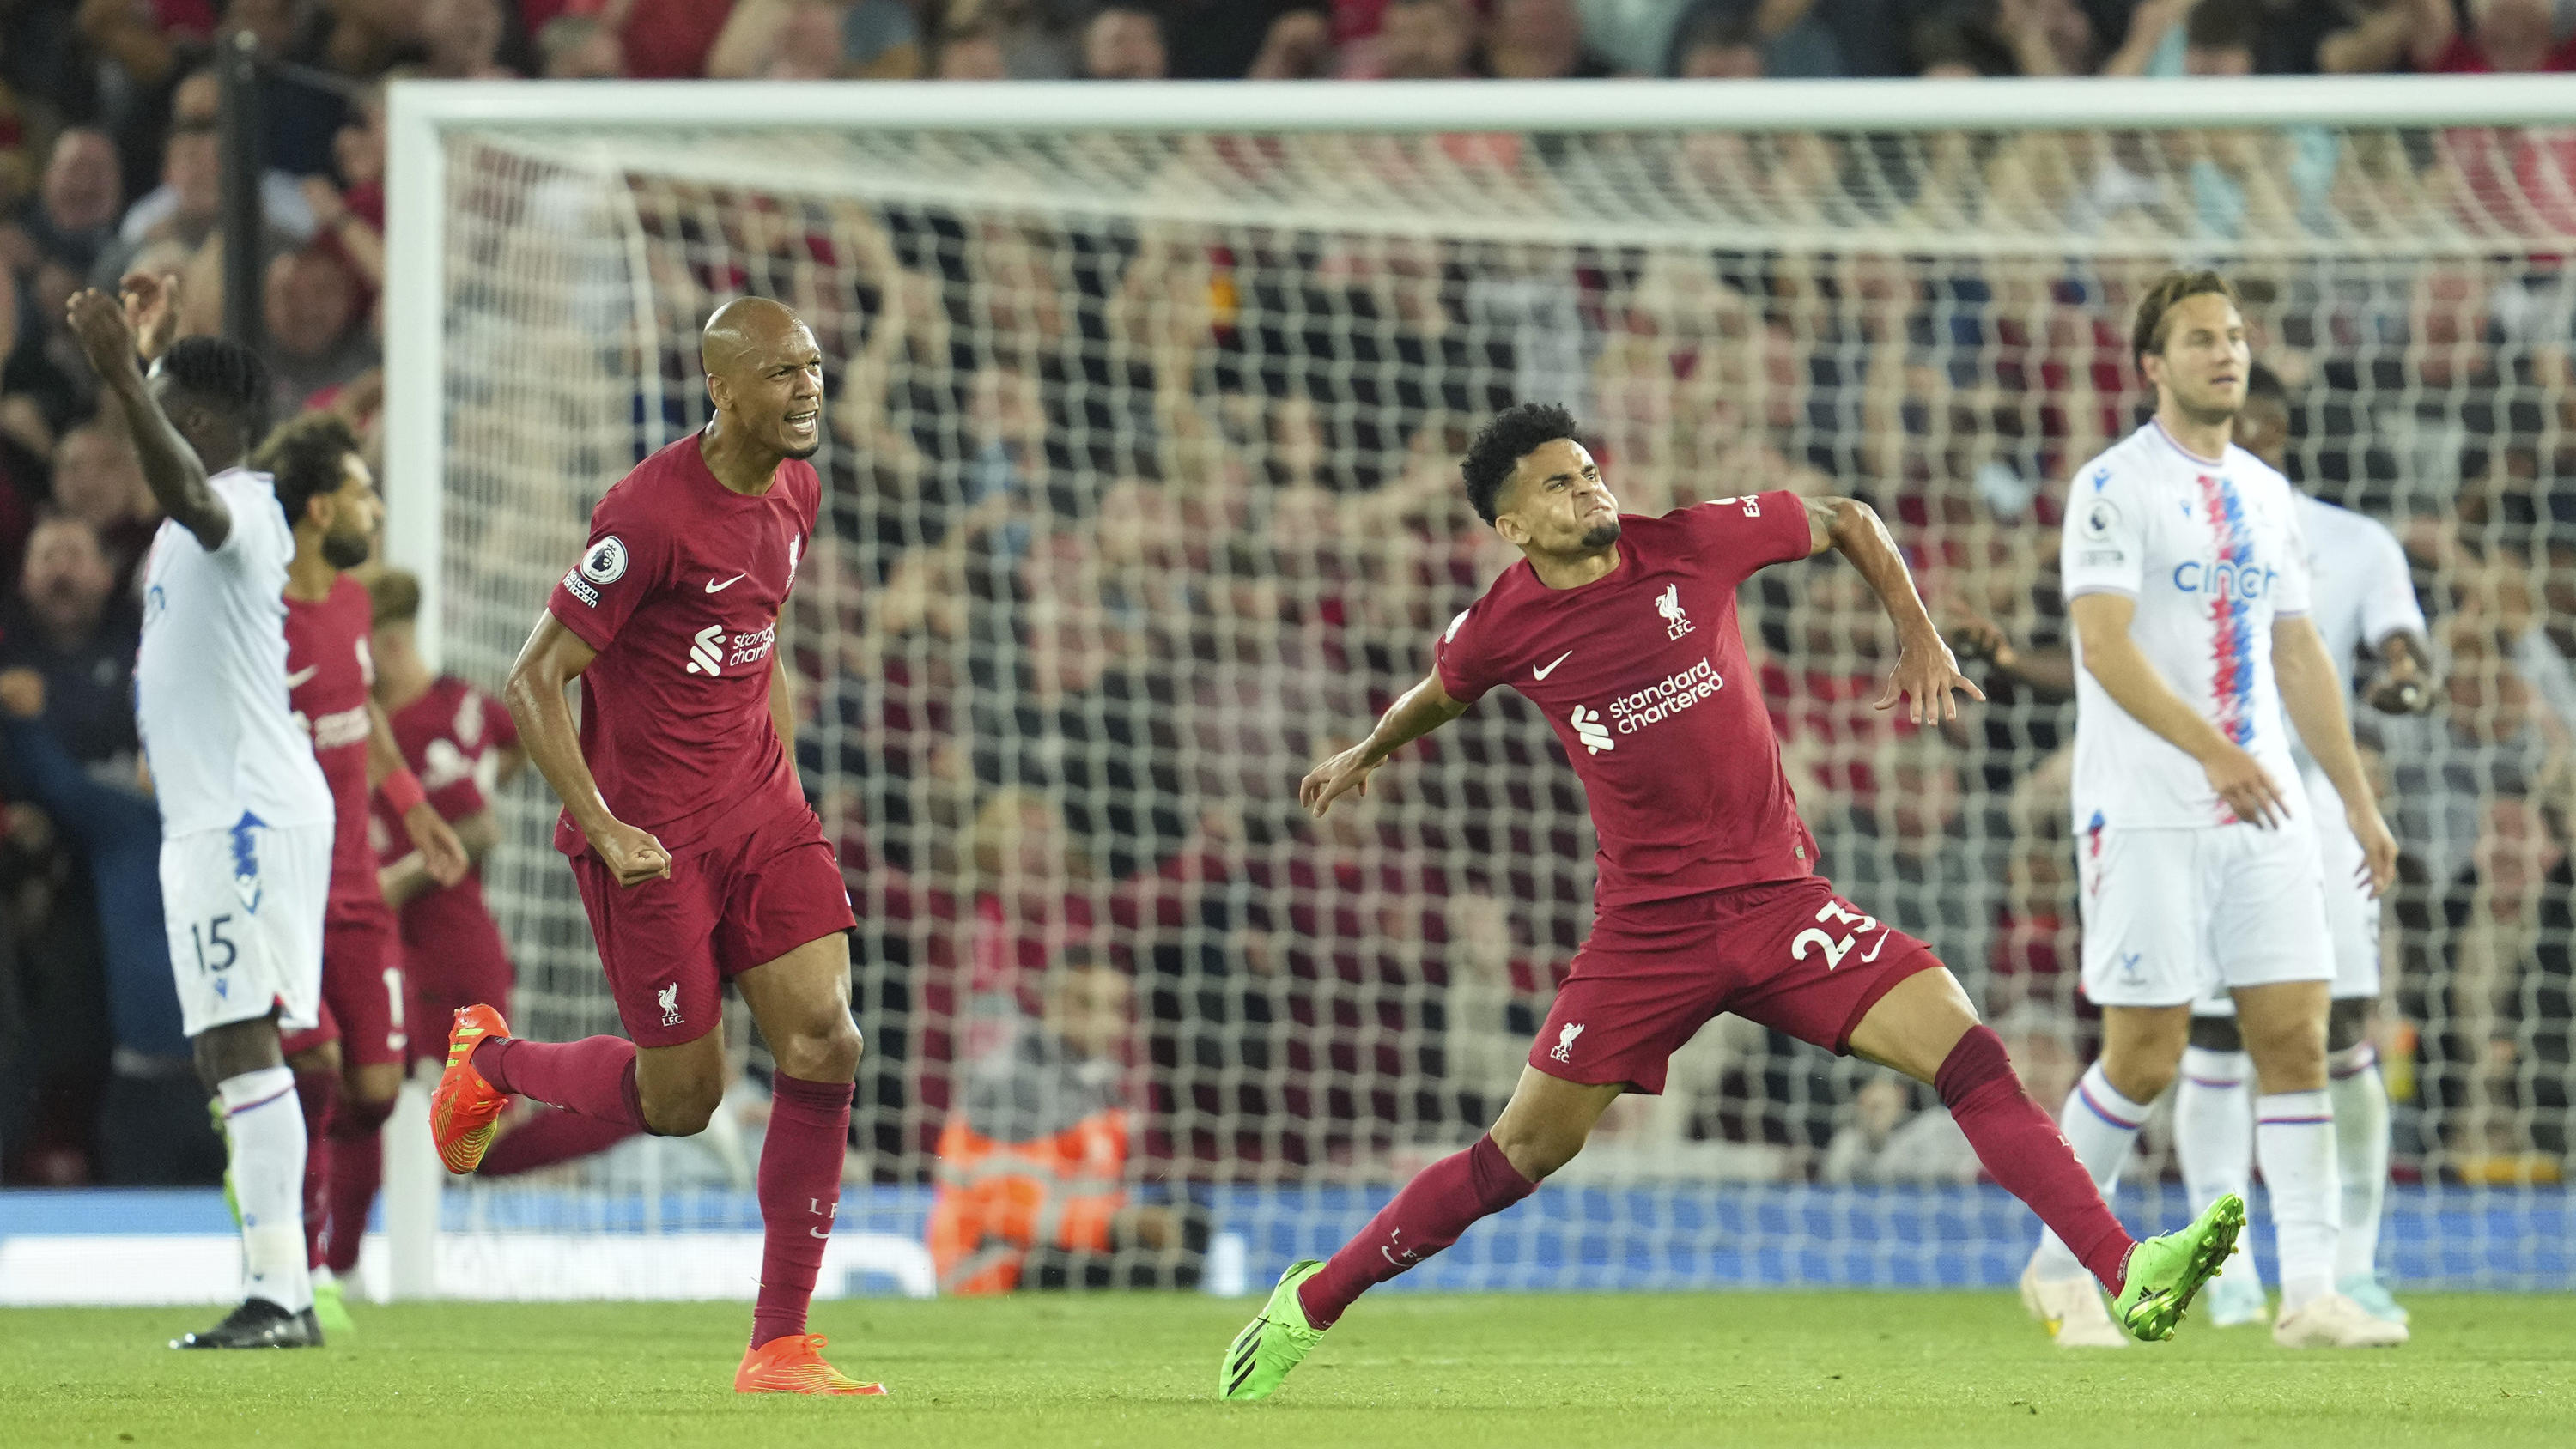 Liverpool's Luis Diaz, right, celebrates after scoring his side's opening goal during the English Premier League soccer match between Liverpool and Crystal Palace at Anfield stadium in Liverpool, England, Monday, Aug. 15, 2022. (AP Photo/Jon Super)